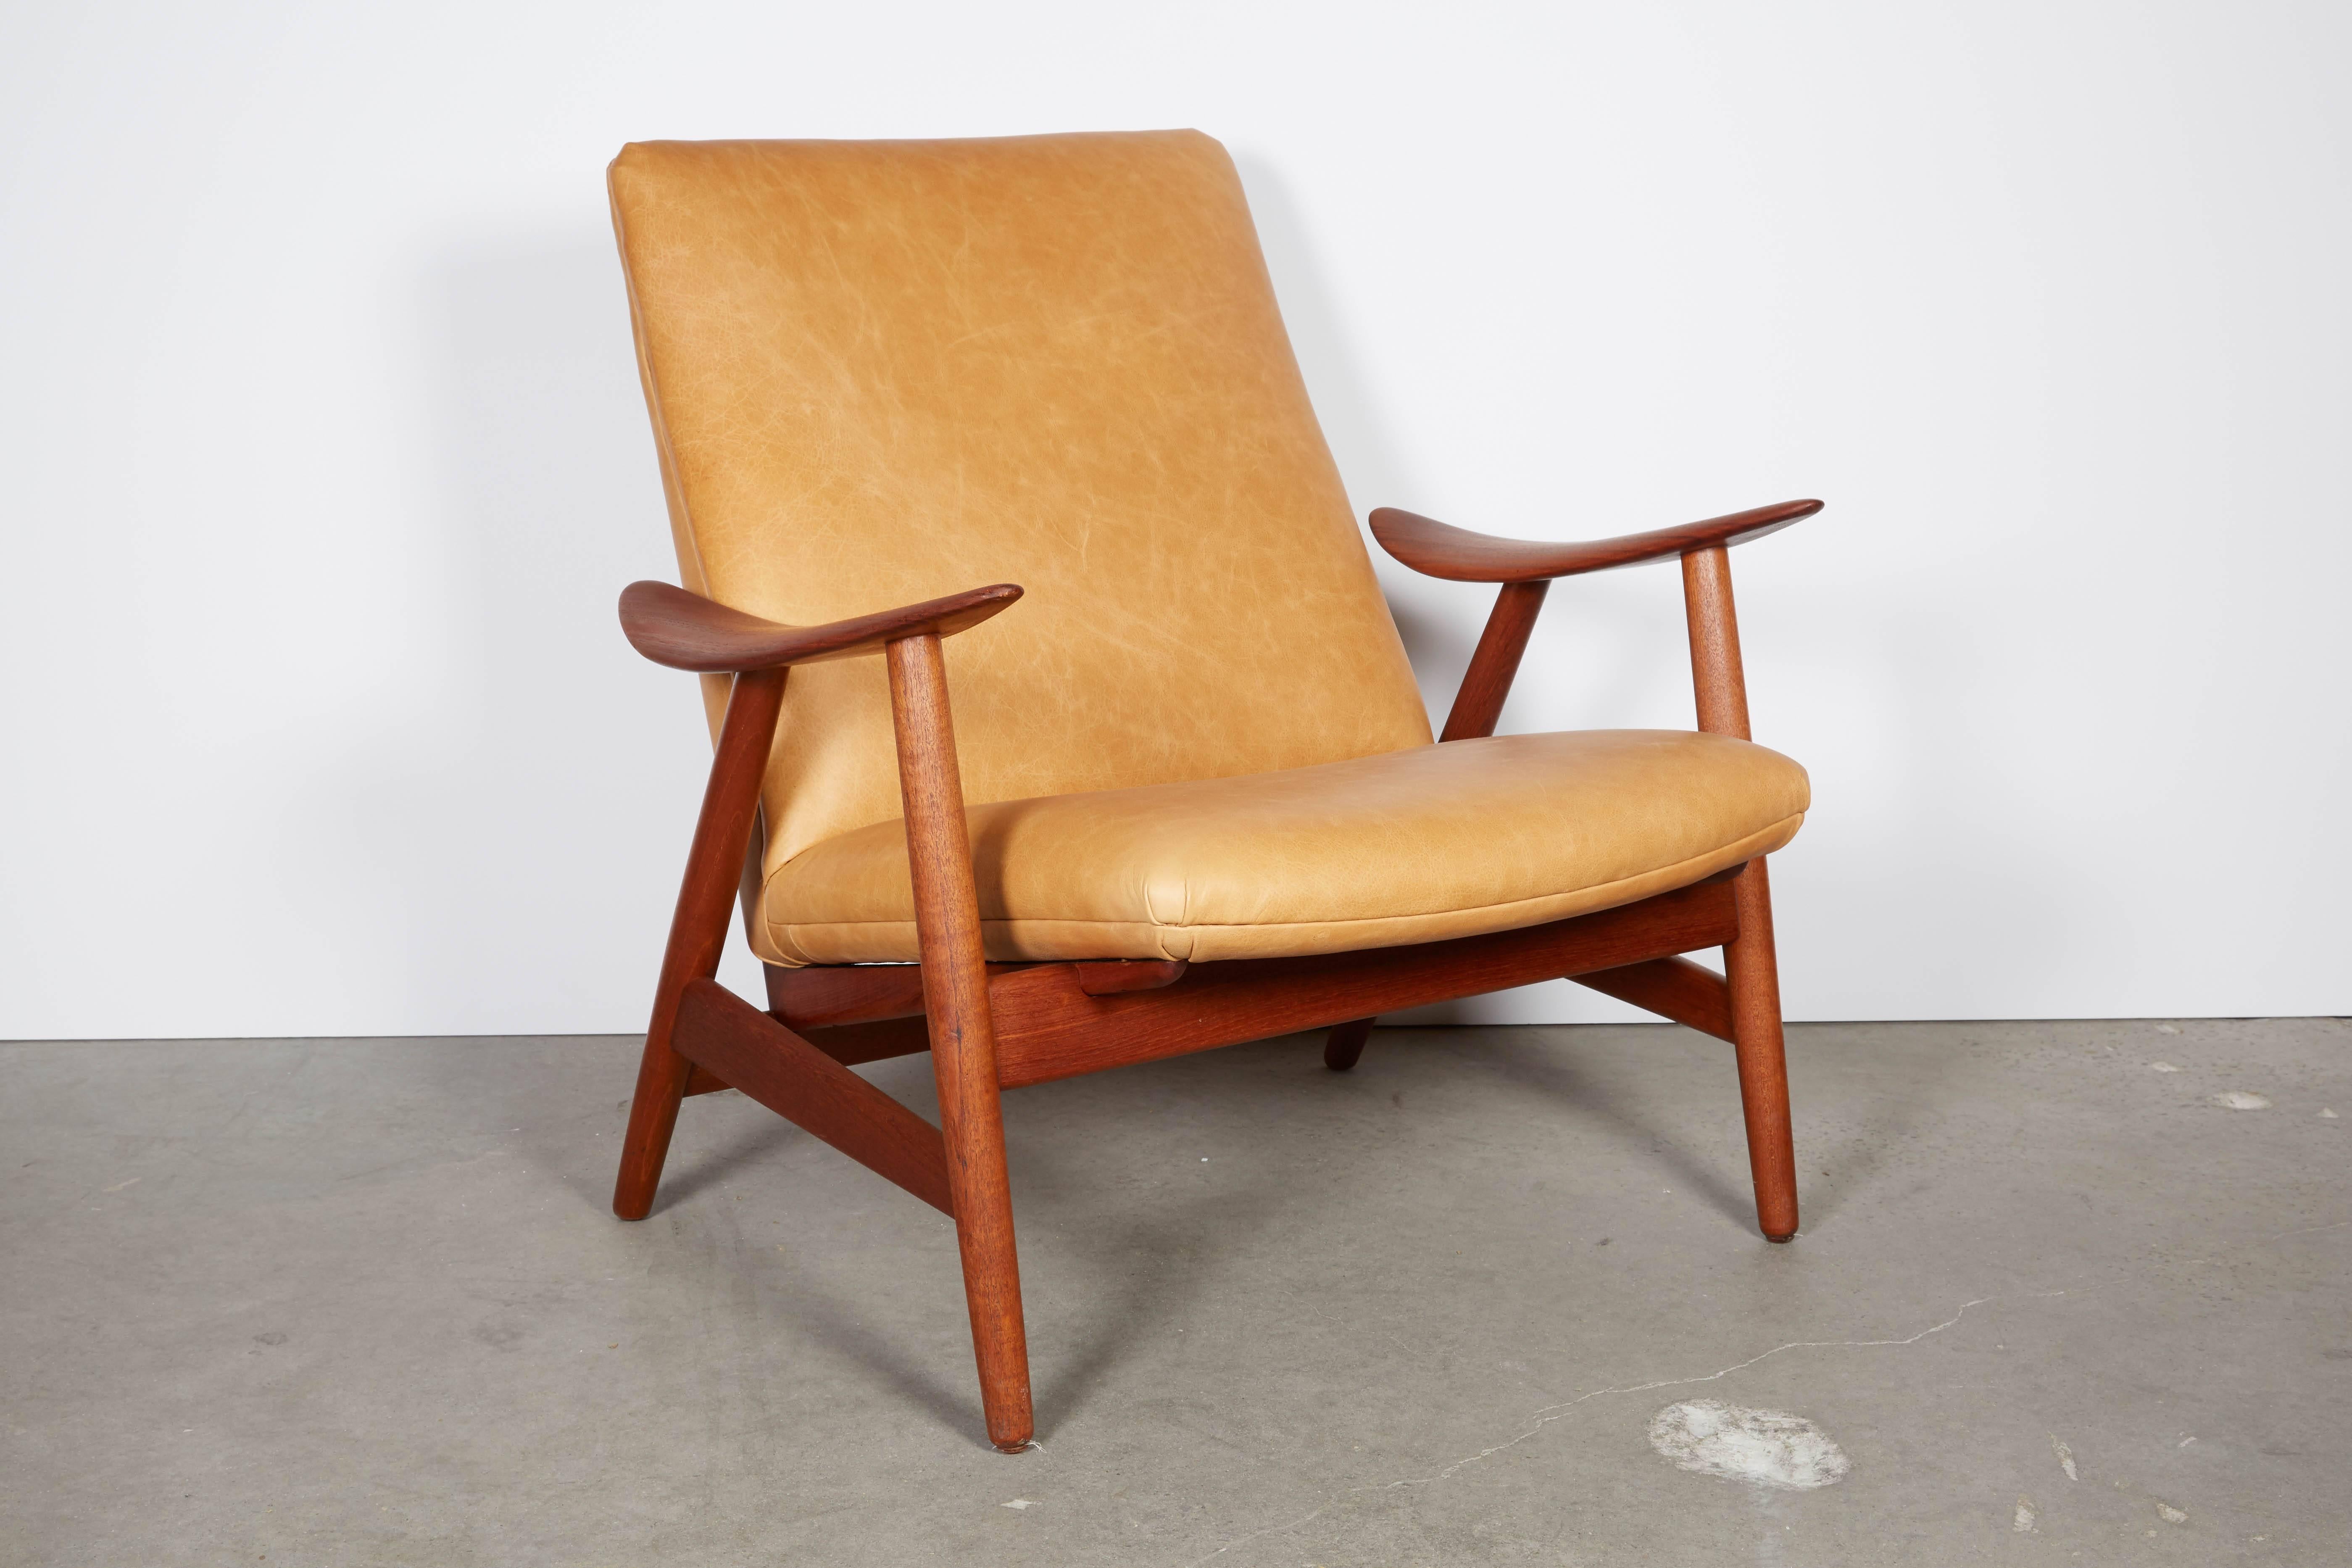 Vintage 1950s Illum Wikkelso Teak Arm Chair

This mid century lounge chair is in excellent condition. Newly upholstered in a weathered tan Italian leather. Beautiful design, and very comfortable. Ready for pick hop, delivery, or shipping anywhere in